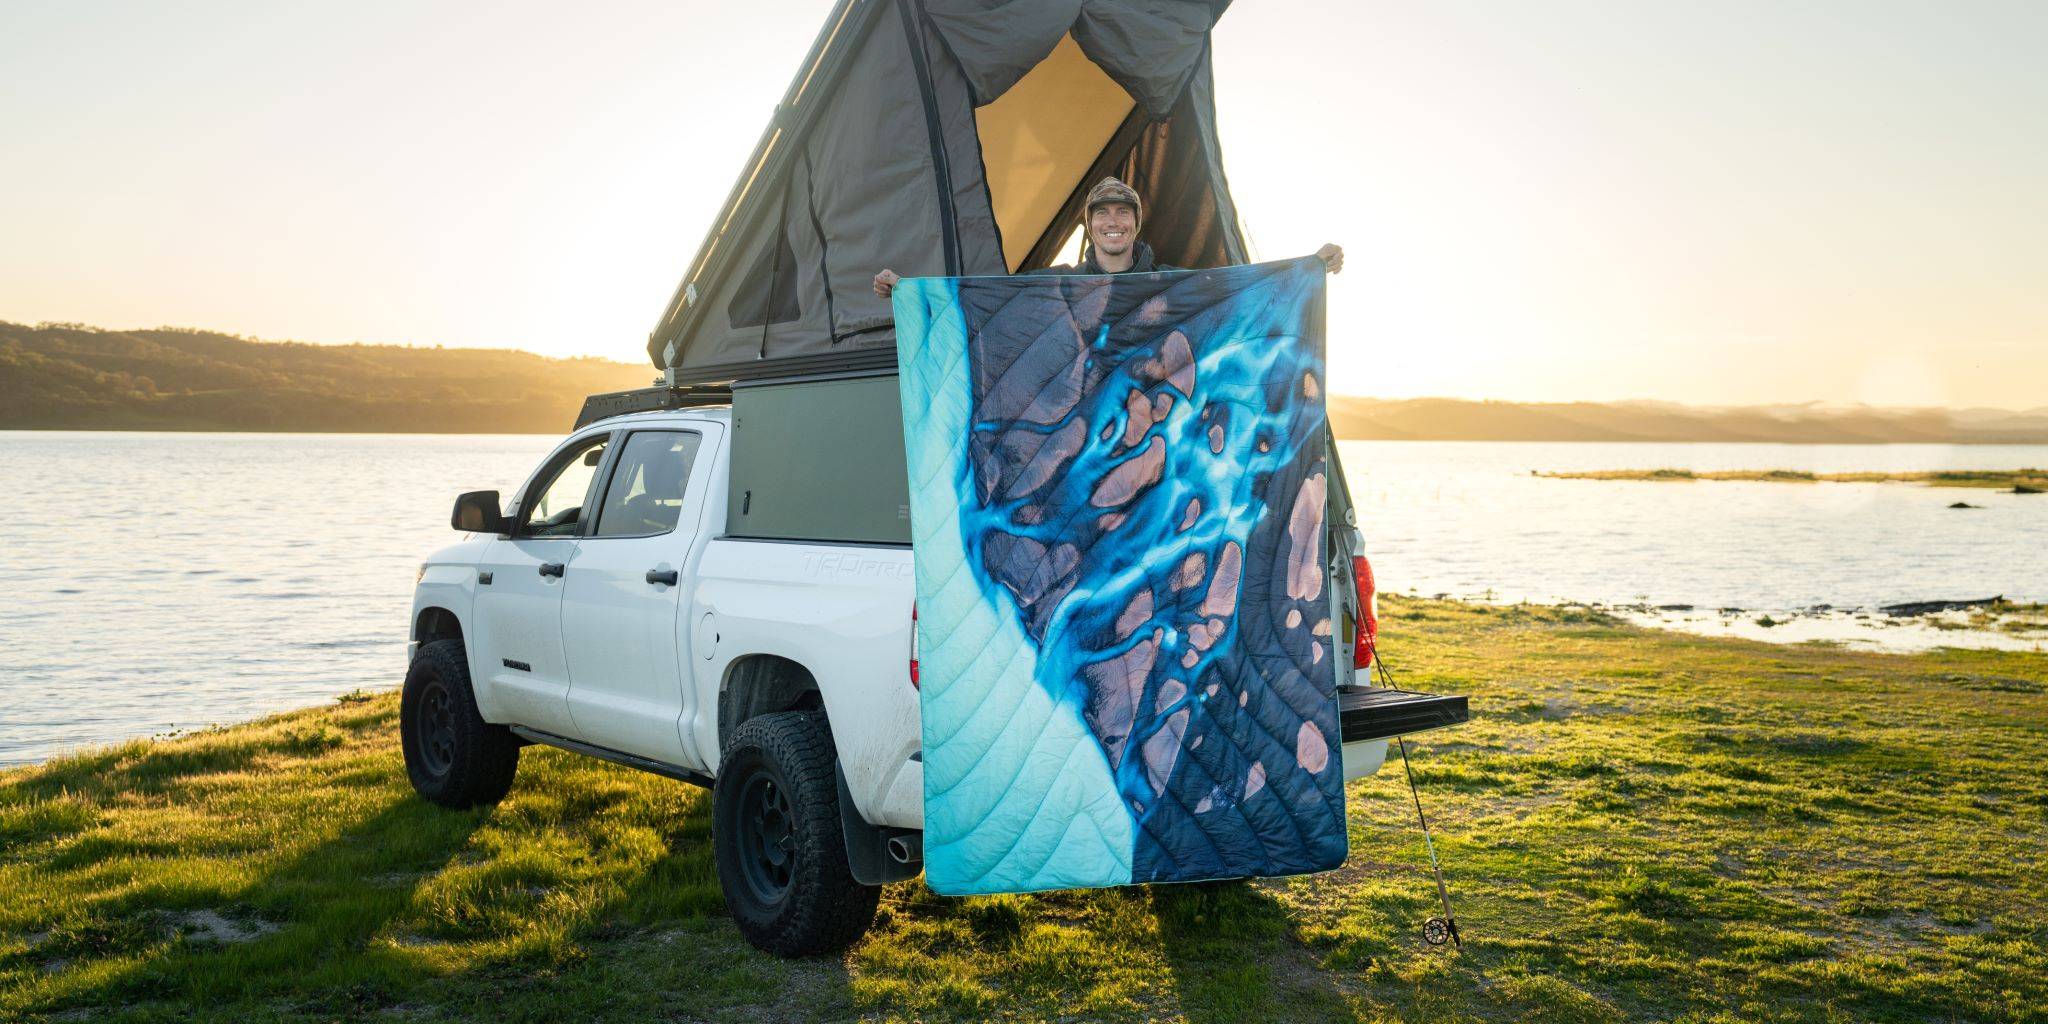 Chris Burkard holding up the Rumpl Original Puffy Blanket - Thjorsa while standing by a white pickup truck with an open rooftop tent near a calm lakeshore with grassy terrain during sunset.